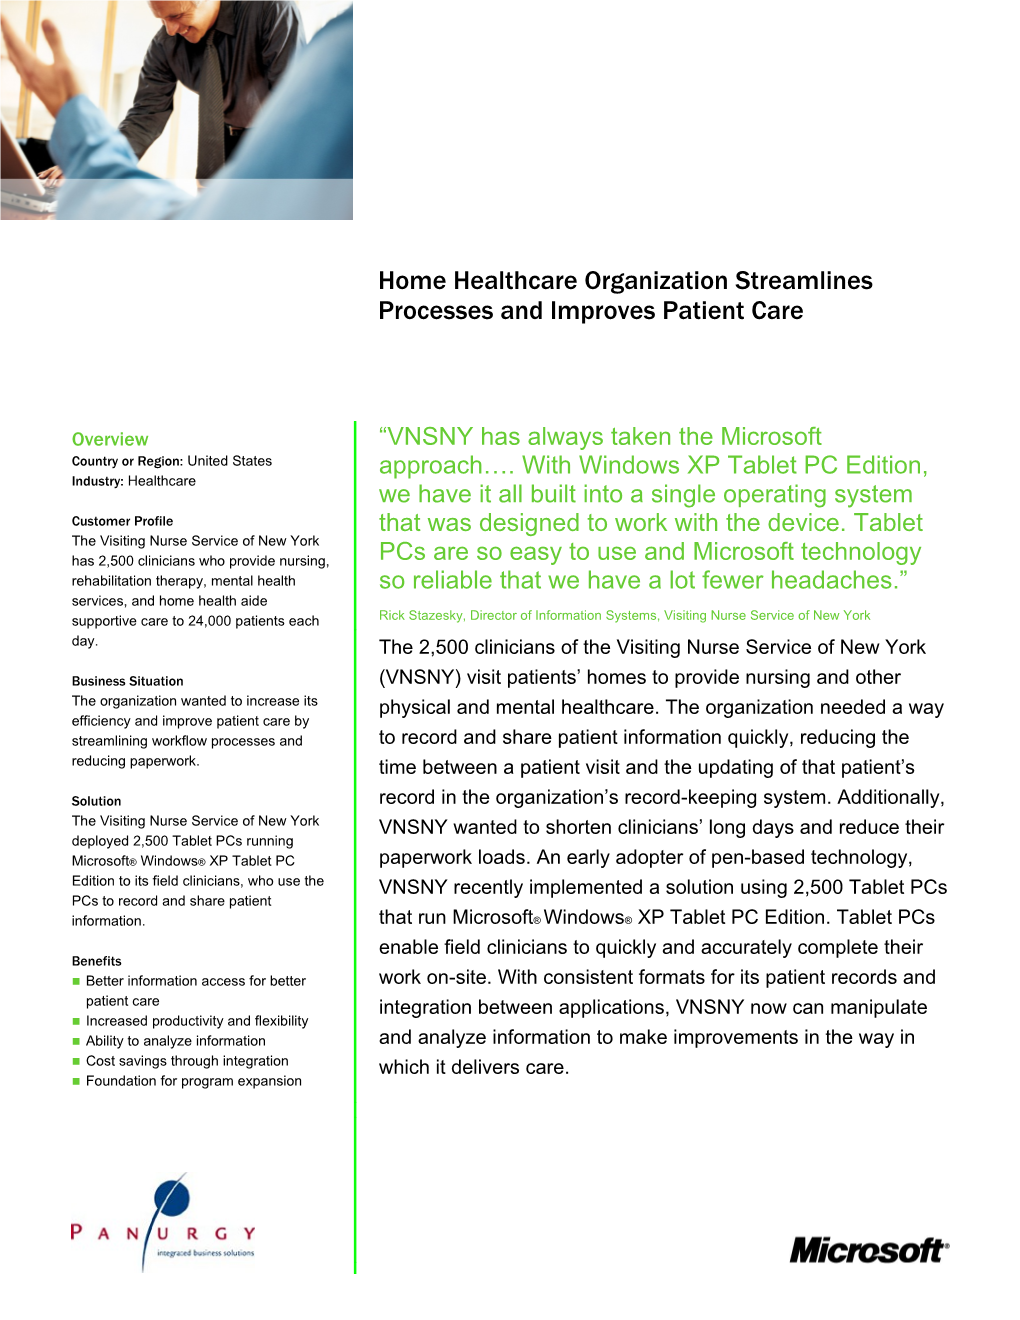 Healthcare Organization Streamlines Processes and Improves Patient Care